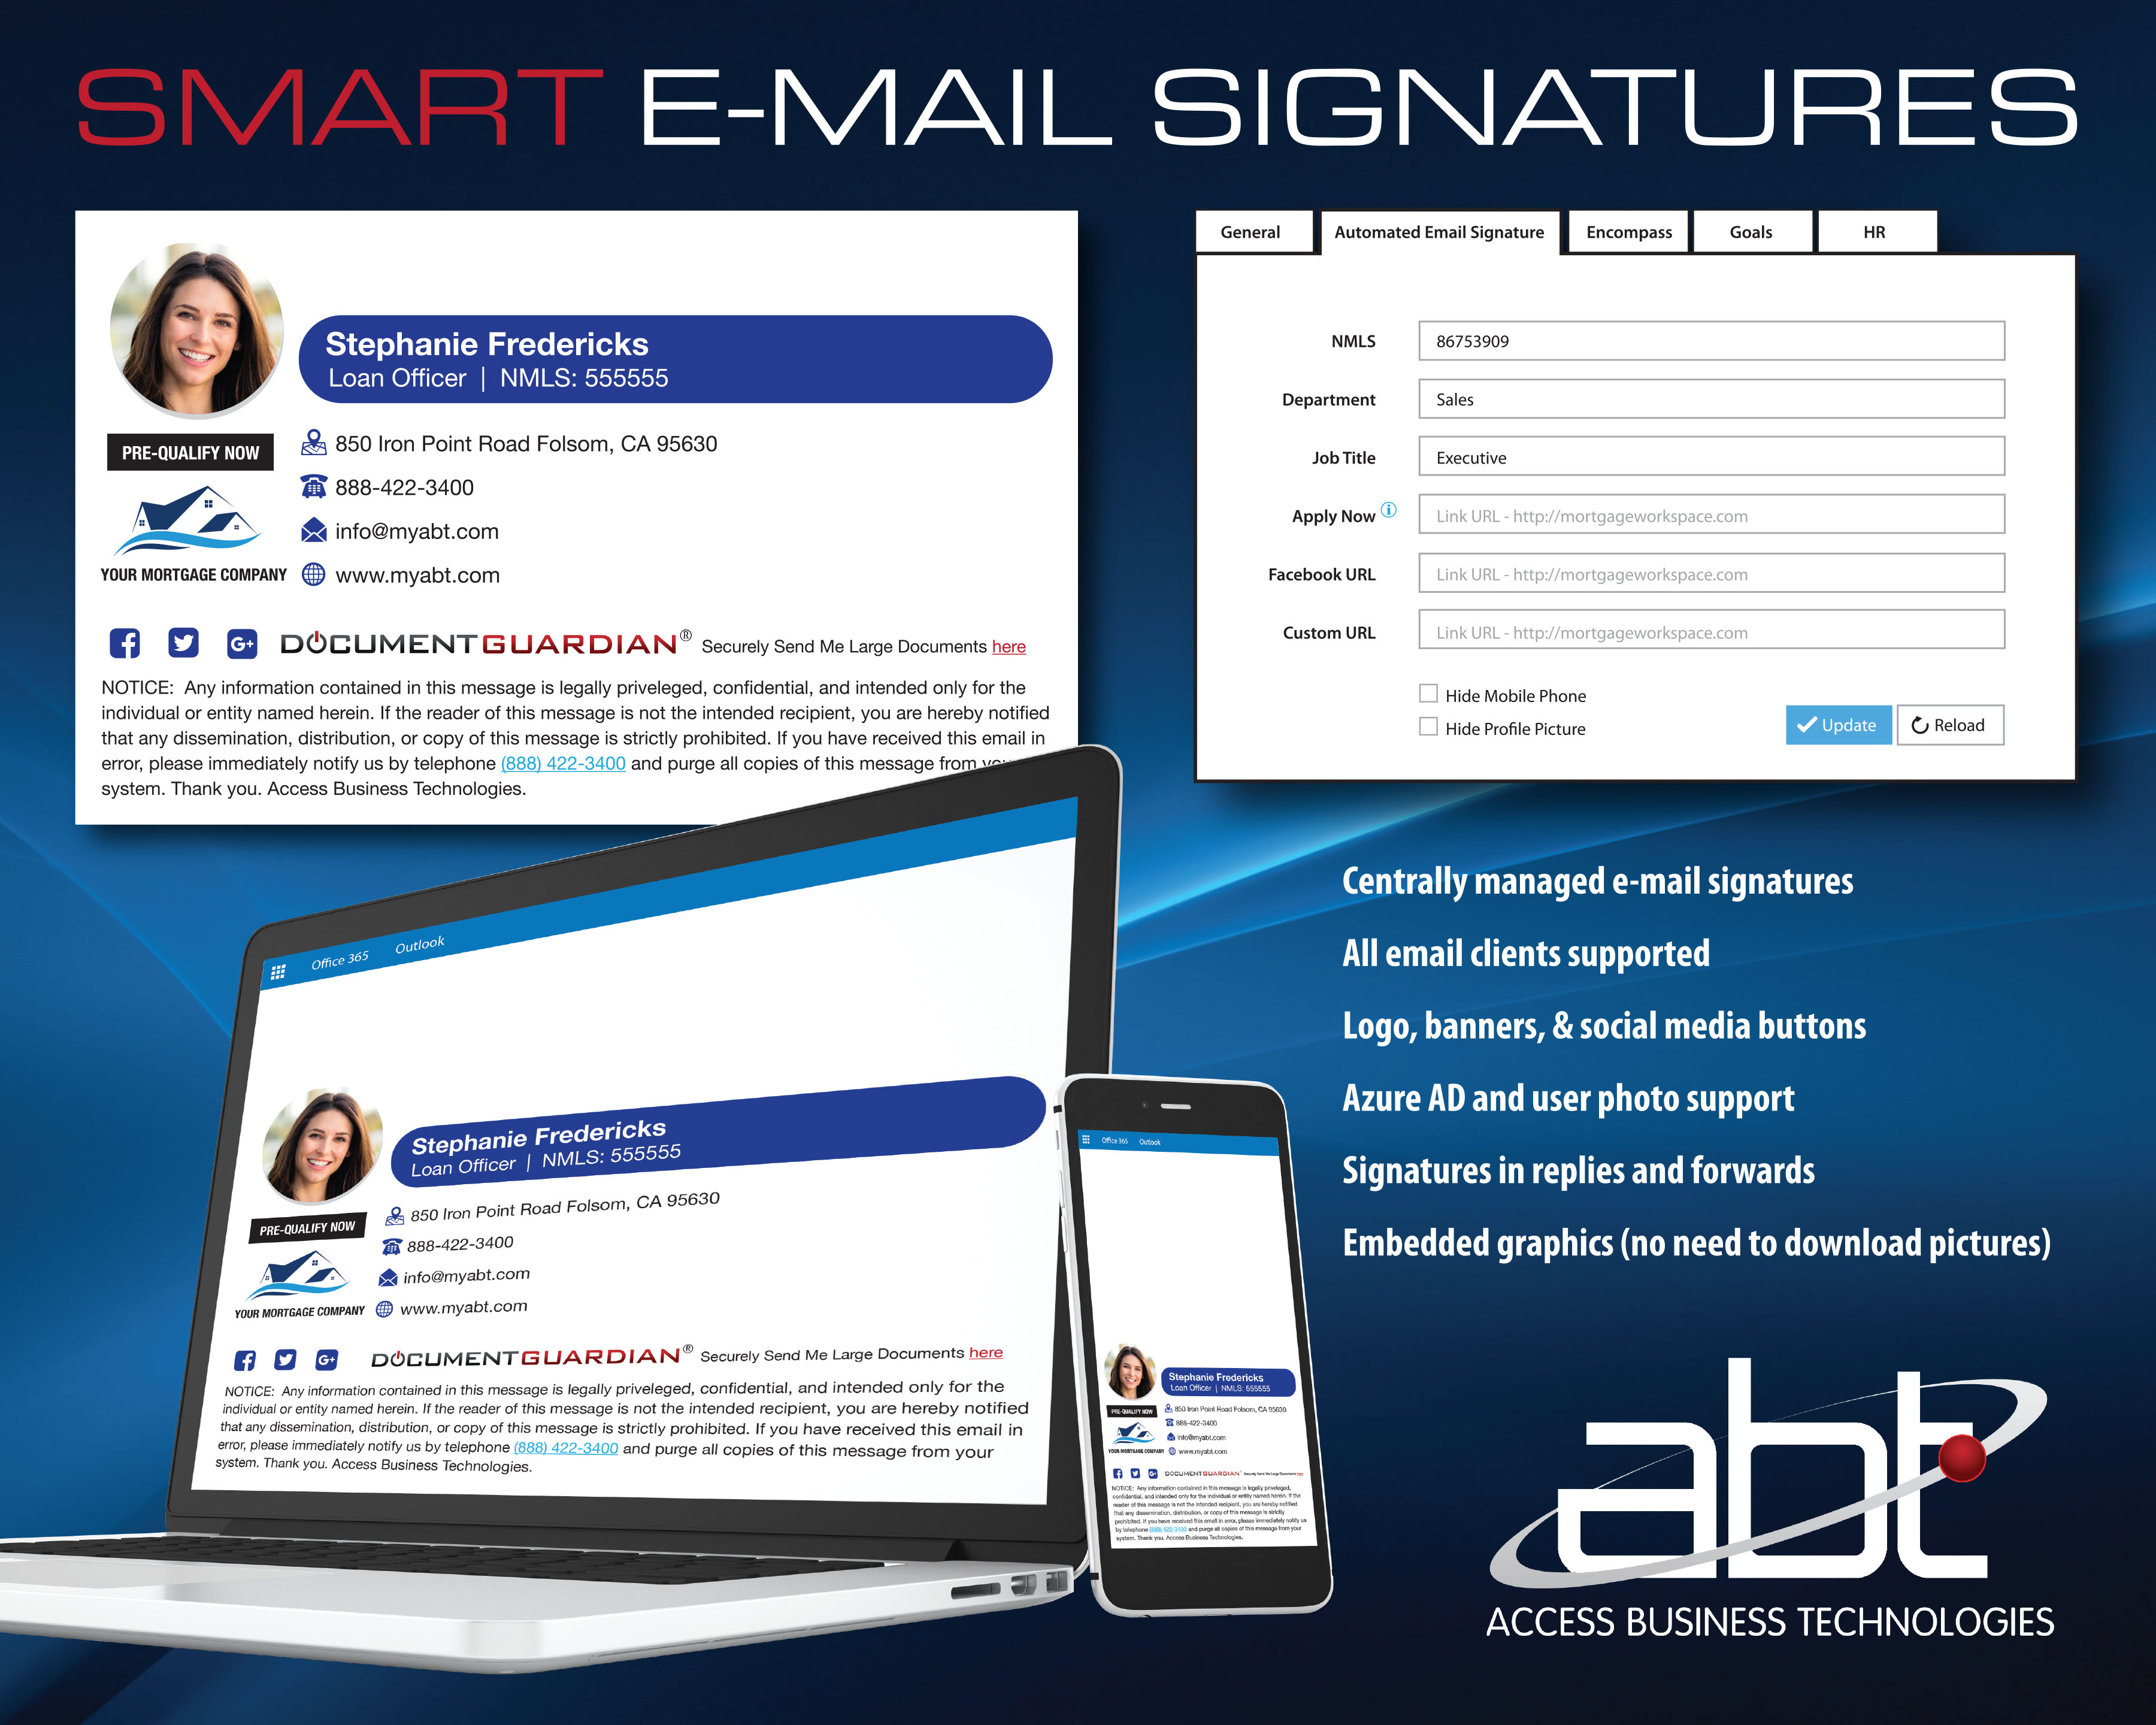 Five Reasons Mortgage Companies Struggle with Email Signatures